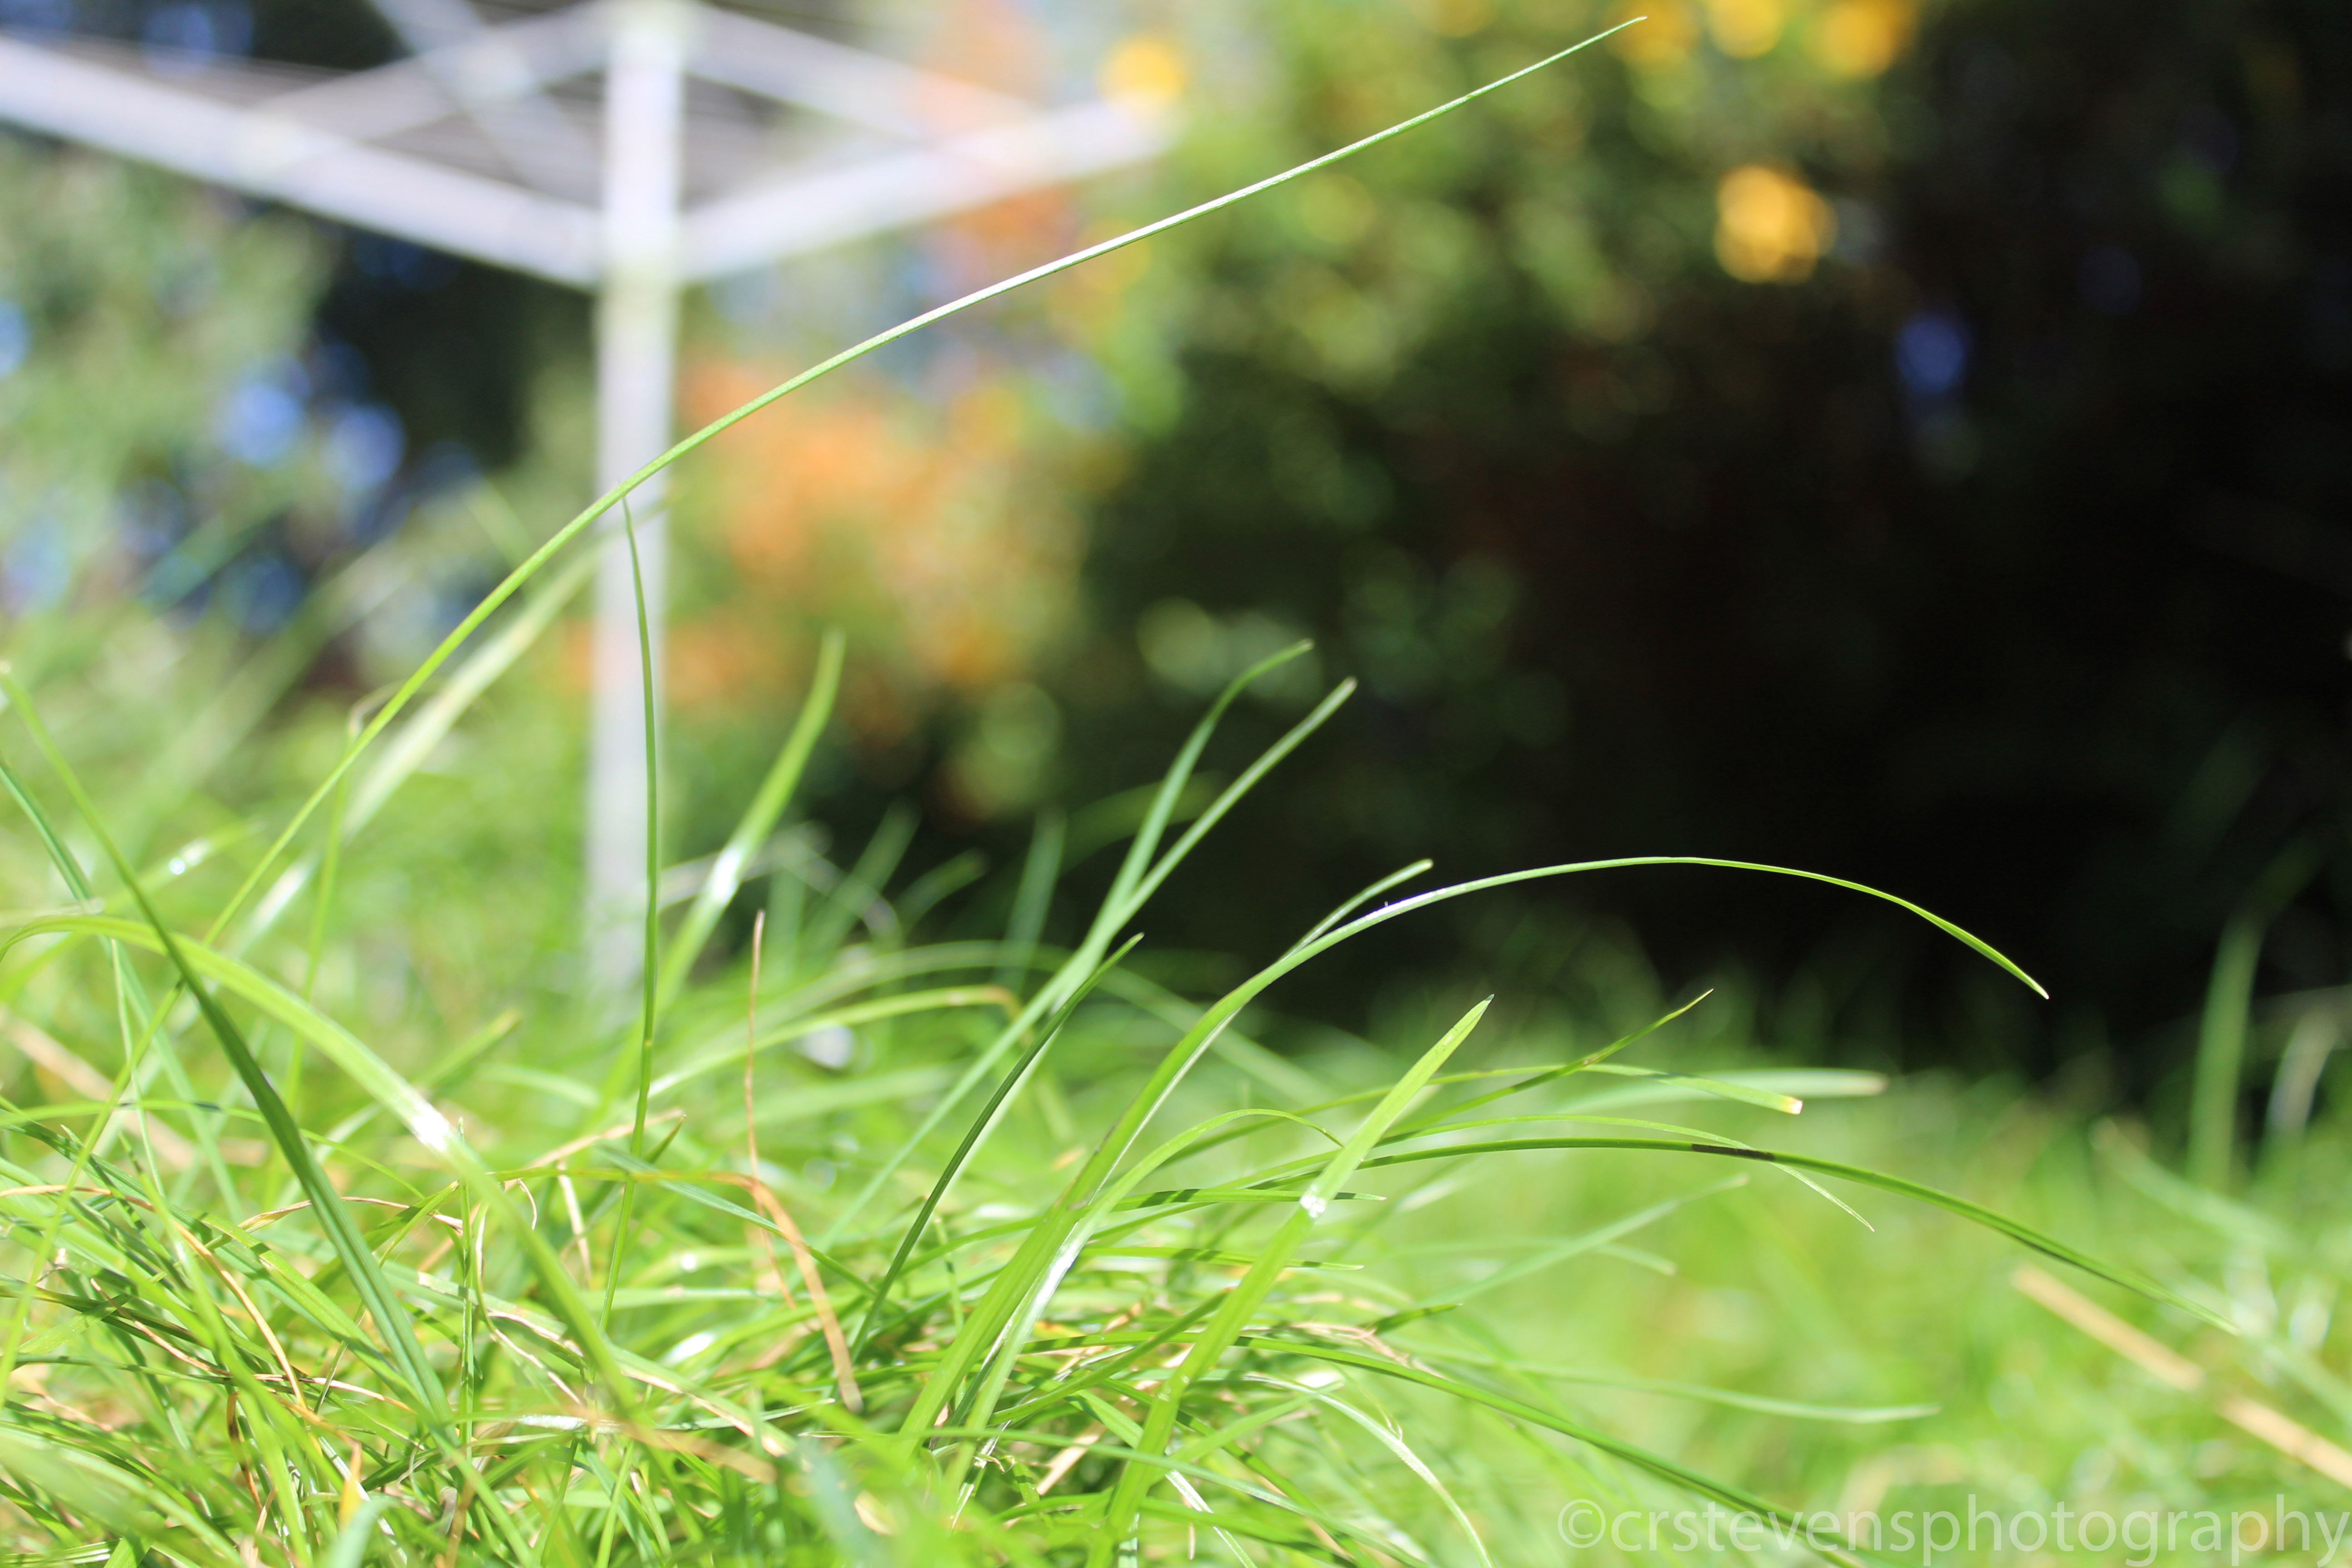 a close up of grass in a garden with a washing line and bushes blurred in the background